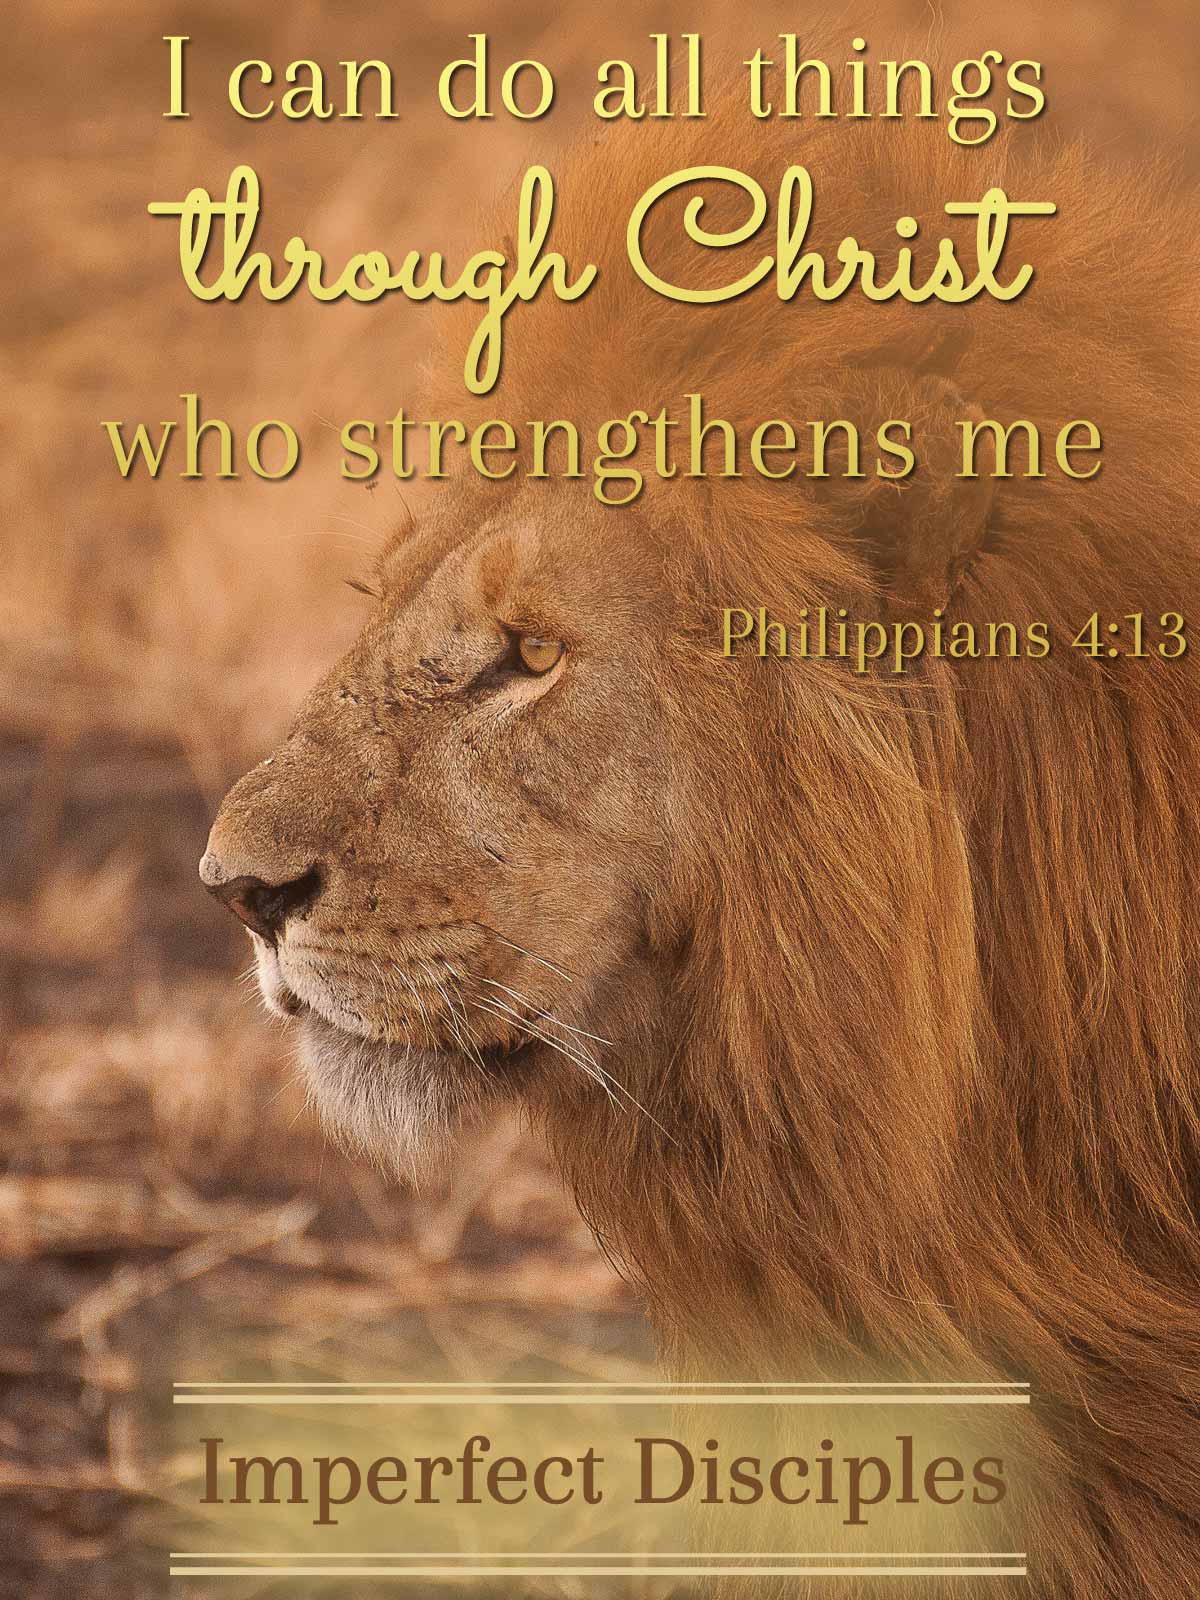 Philippians 4:13 - I can do all things through Christ who strengthens me